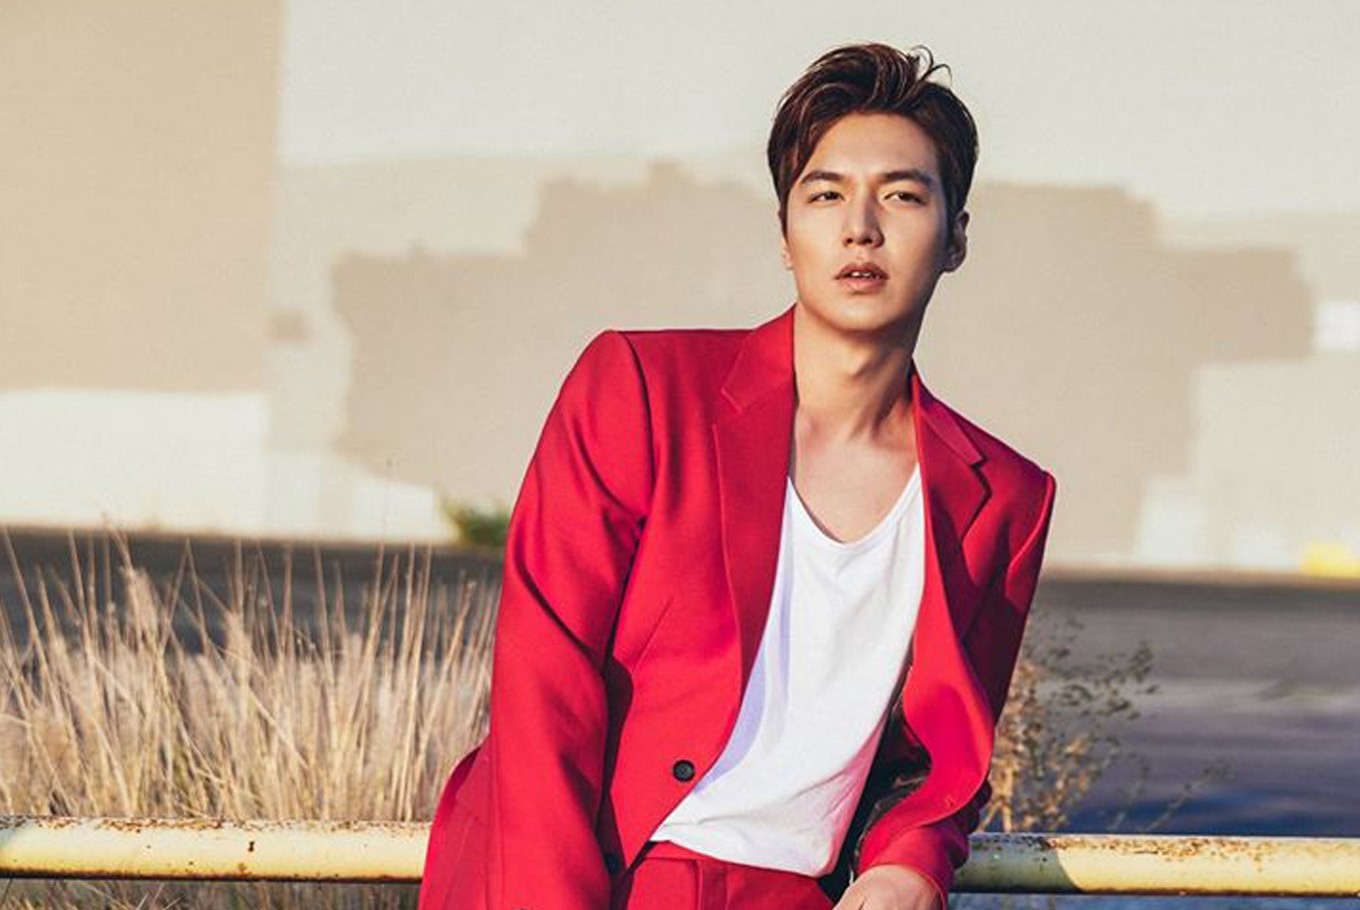 Lee-min-Ho-net-worth - Celeb Face - Know Everything About Your Favorite Star